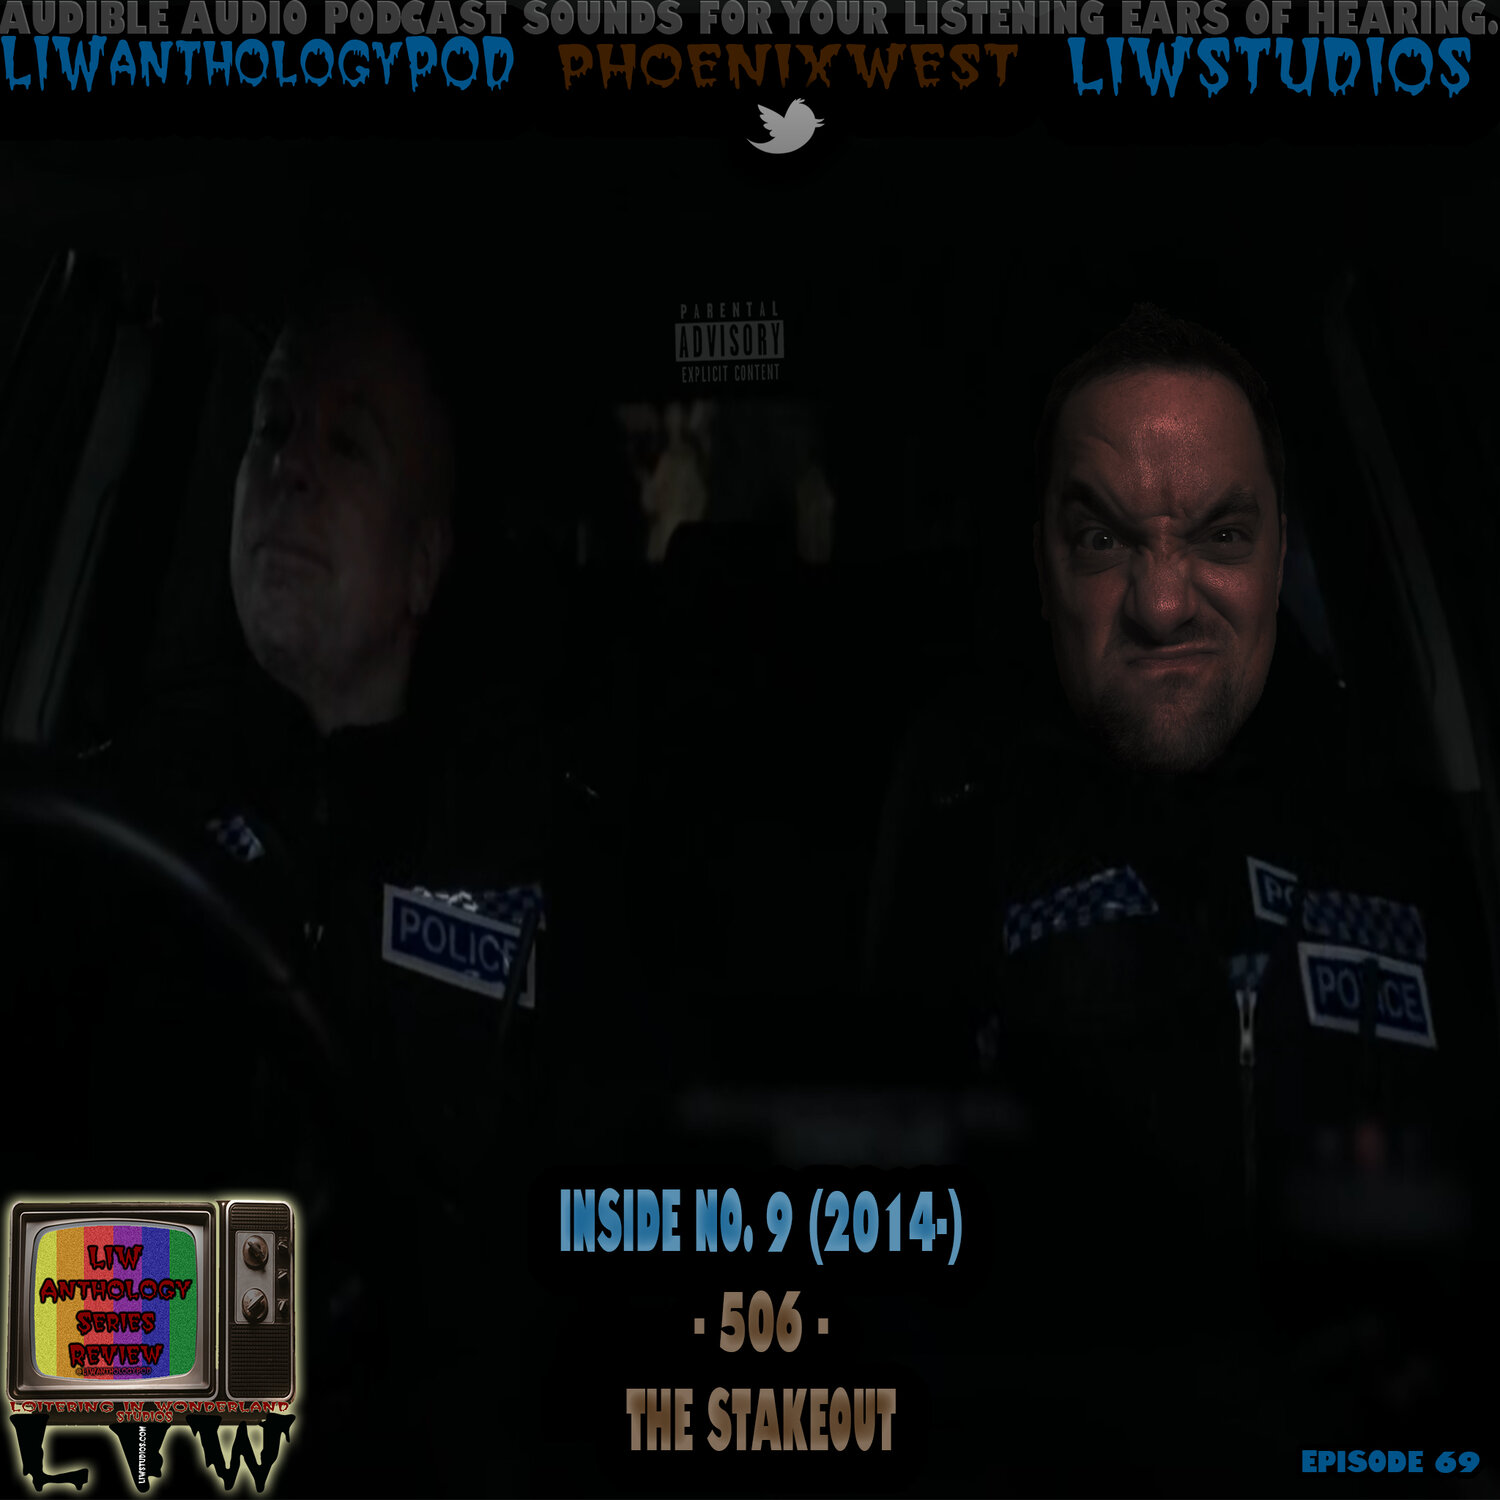 69: Inside No. 9 - 506 - The Stakeout (Live)